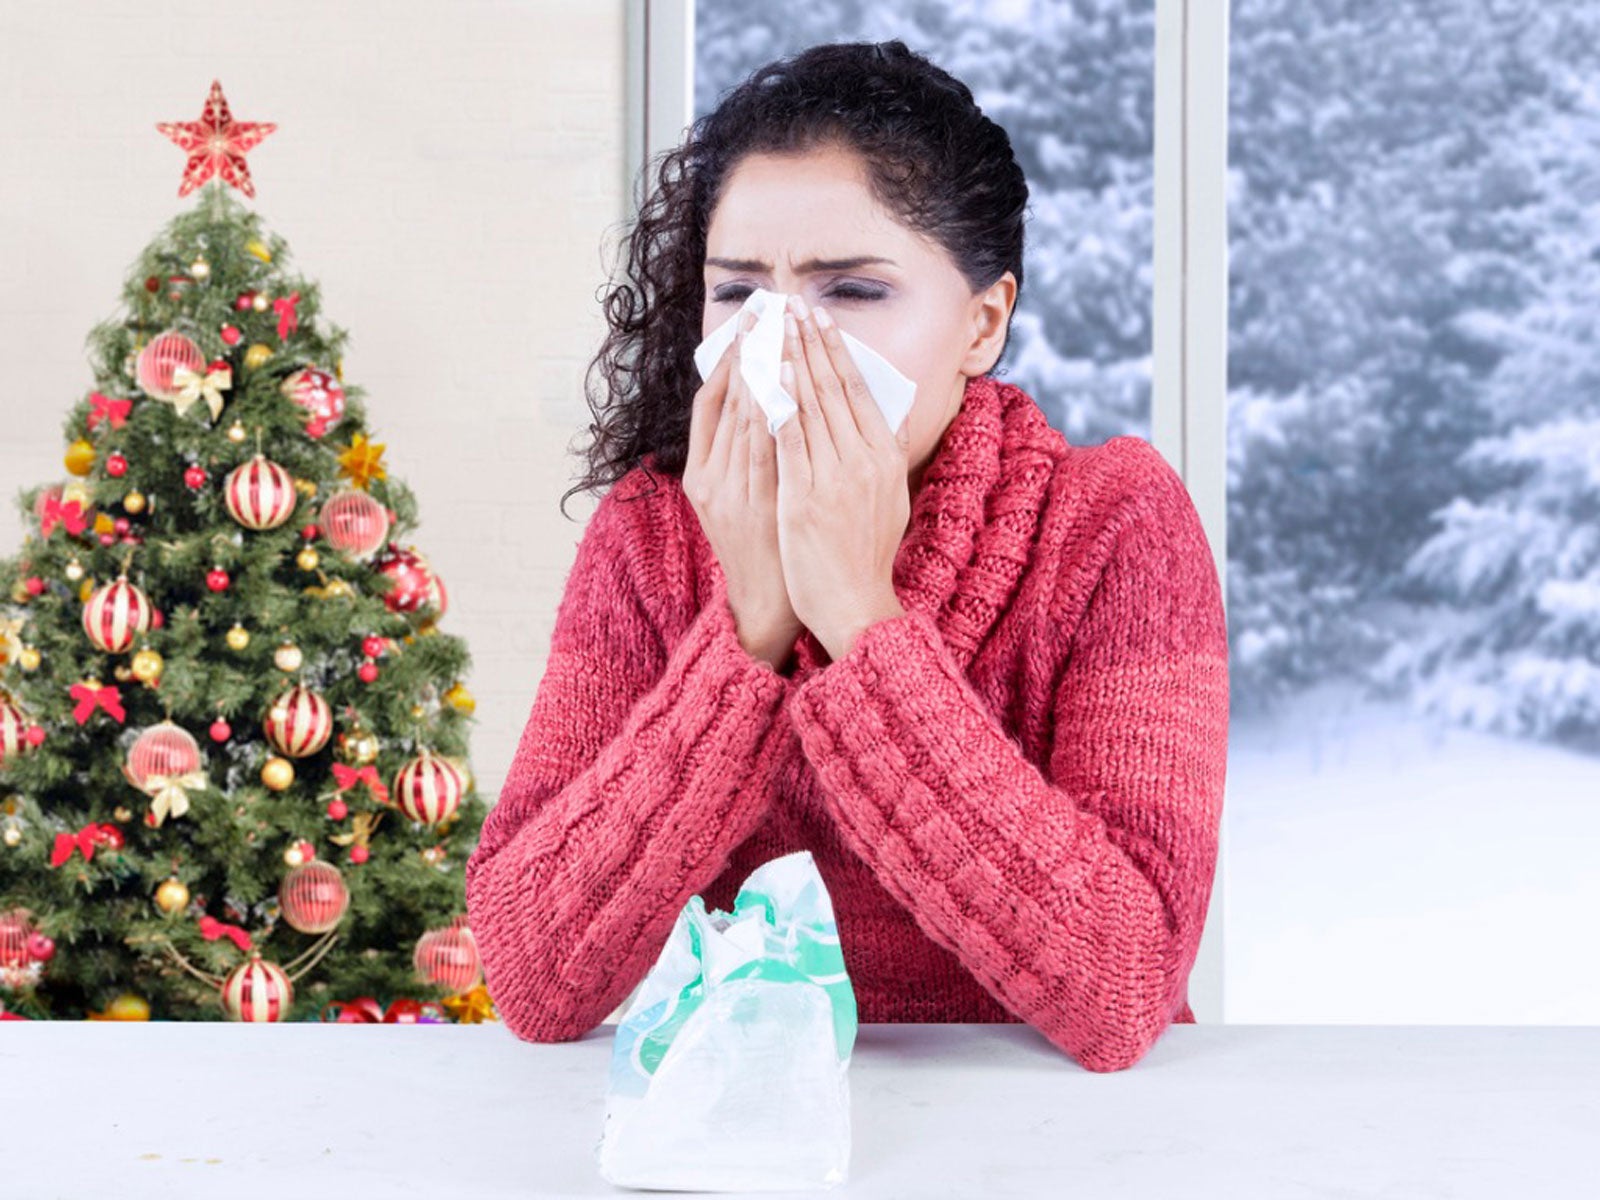 Christmas Tree Allergies – Can You Be Allergic To Christmas Trees